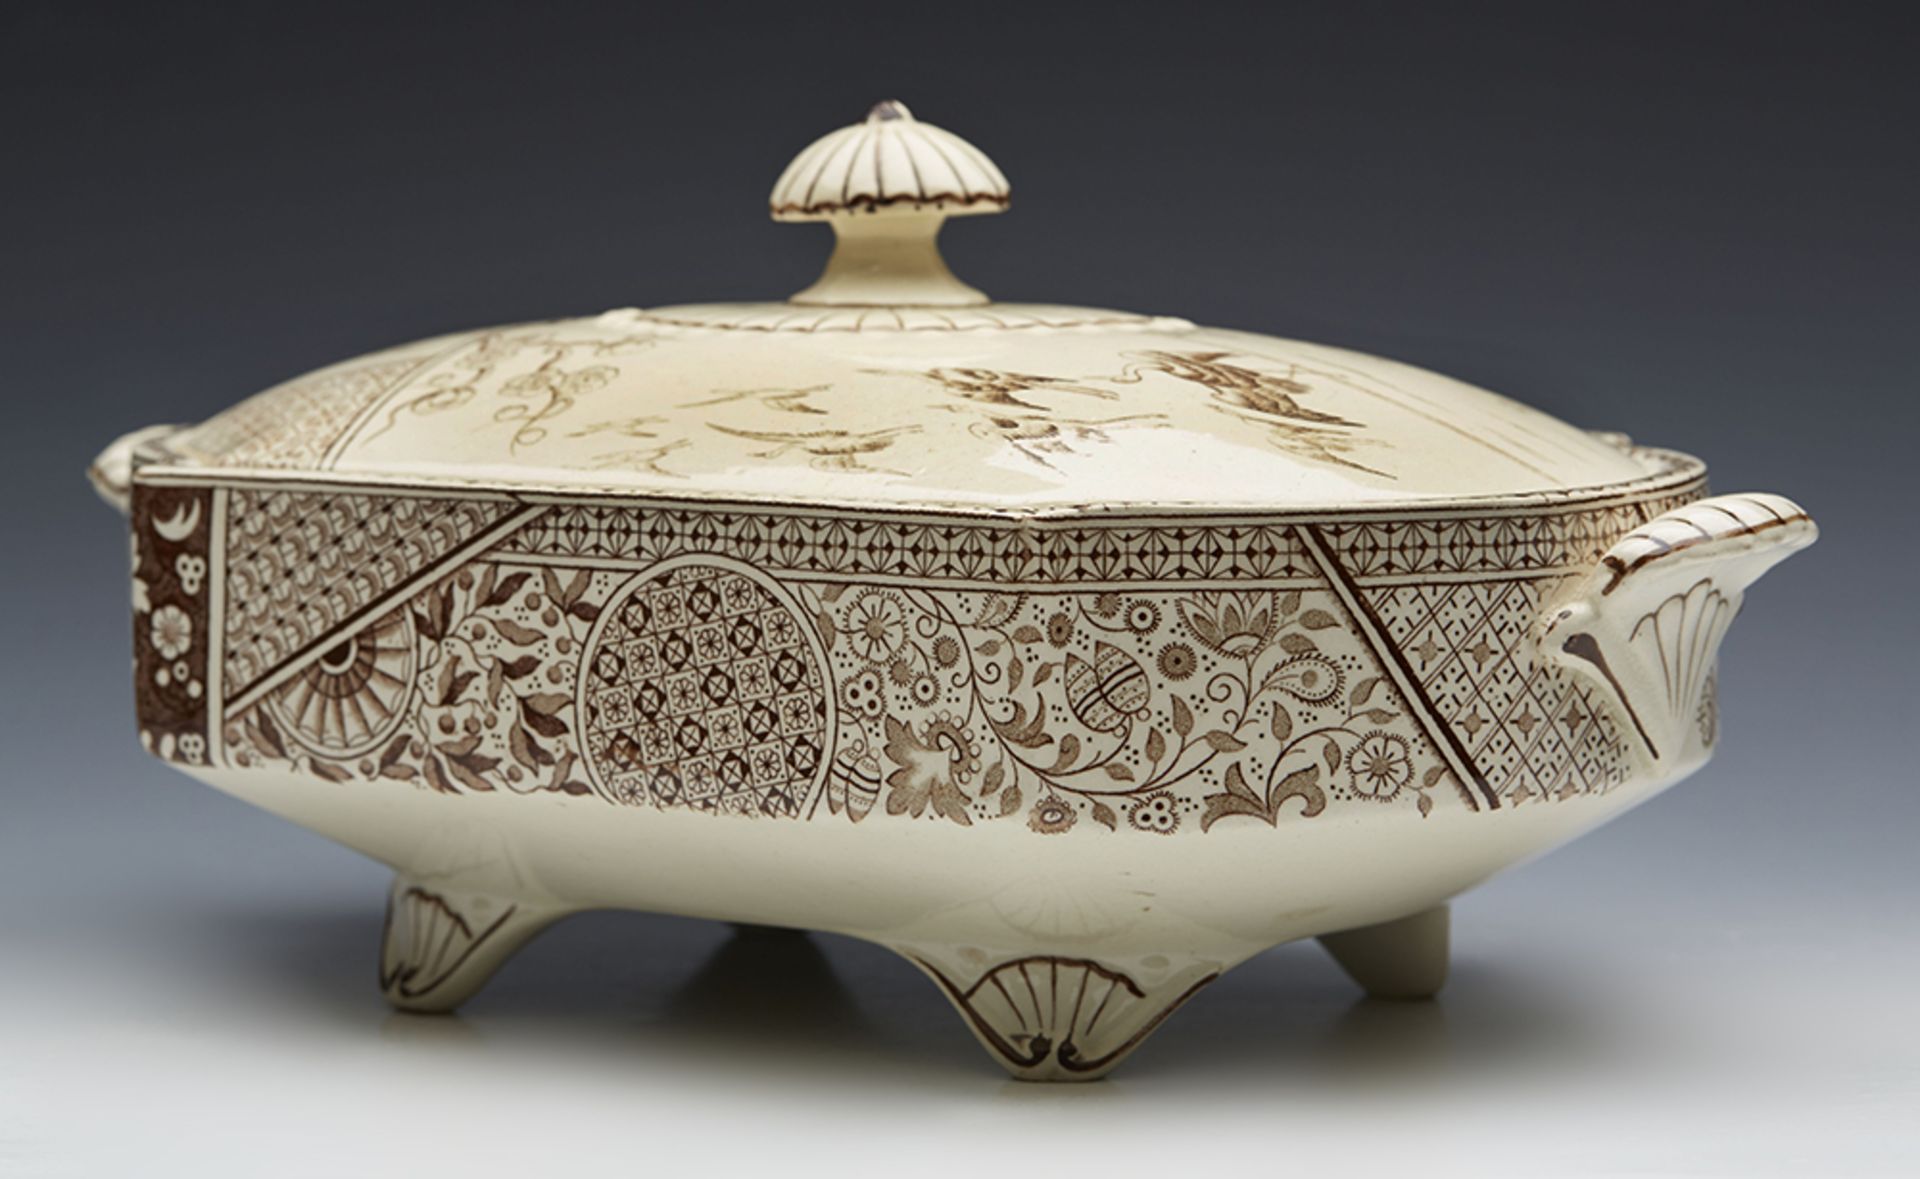 AESTHETIC MOVEMENT BROWNHILL KIOTO PATTERN LIDDED TUREEN DATED 1883 - Image 10 of 10